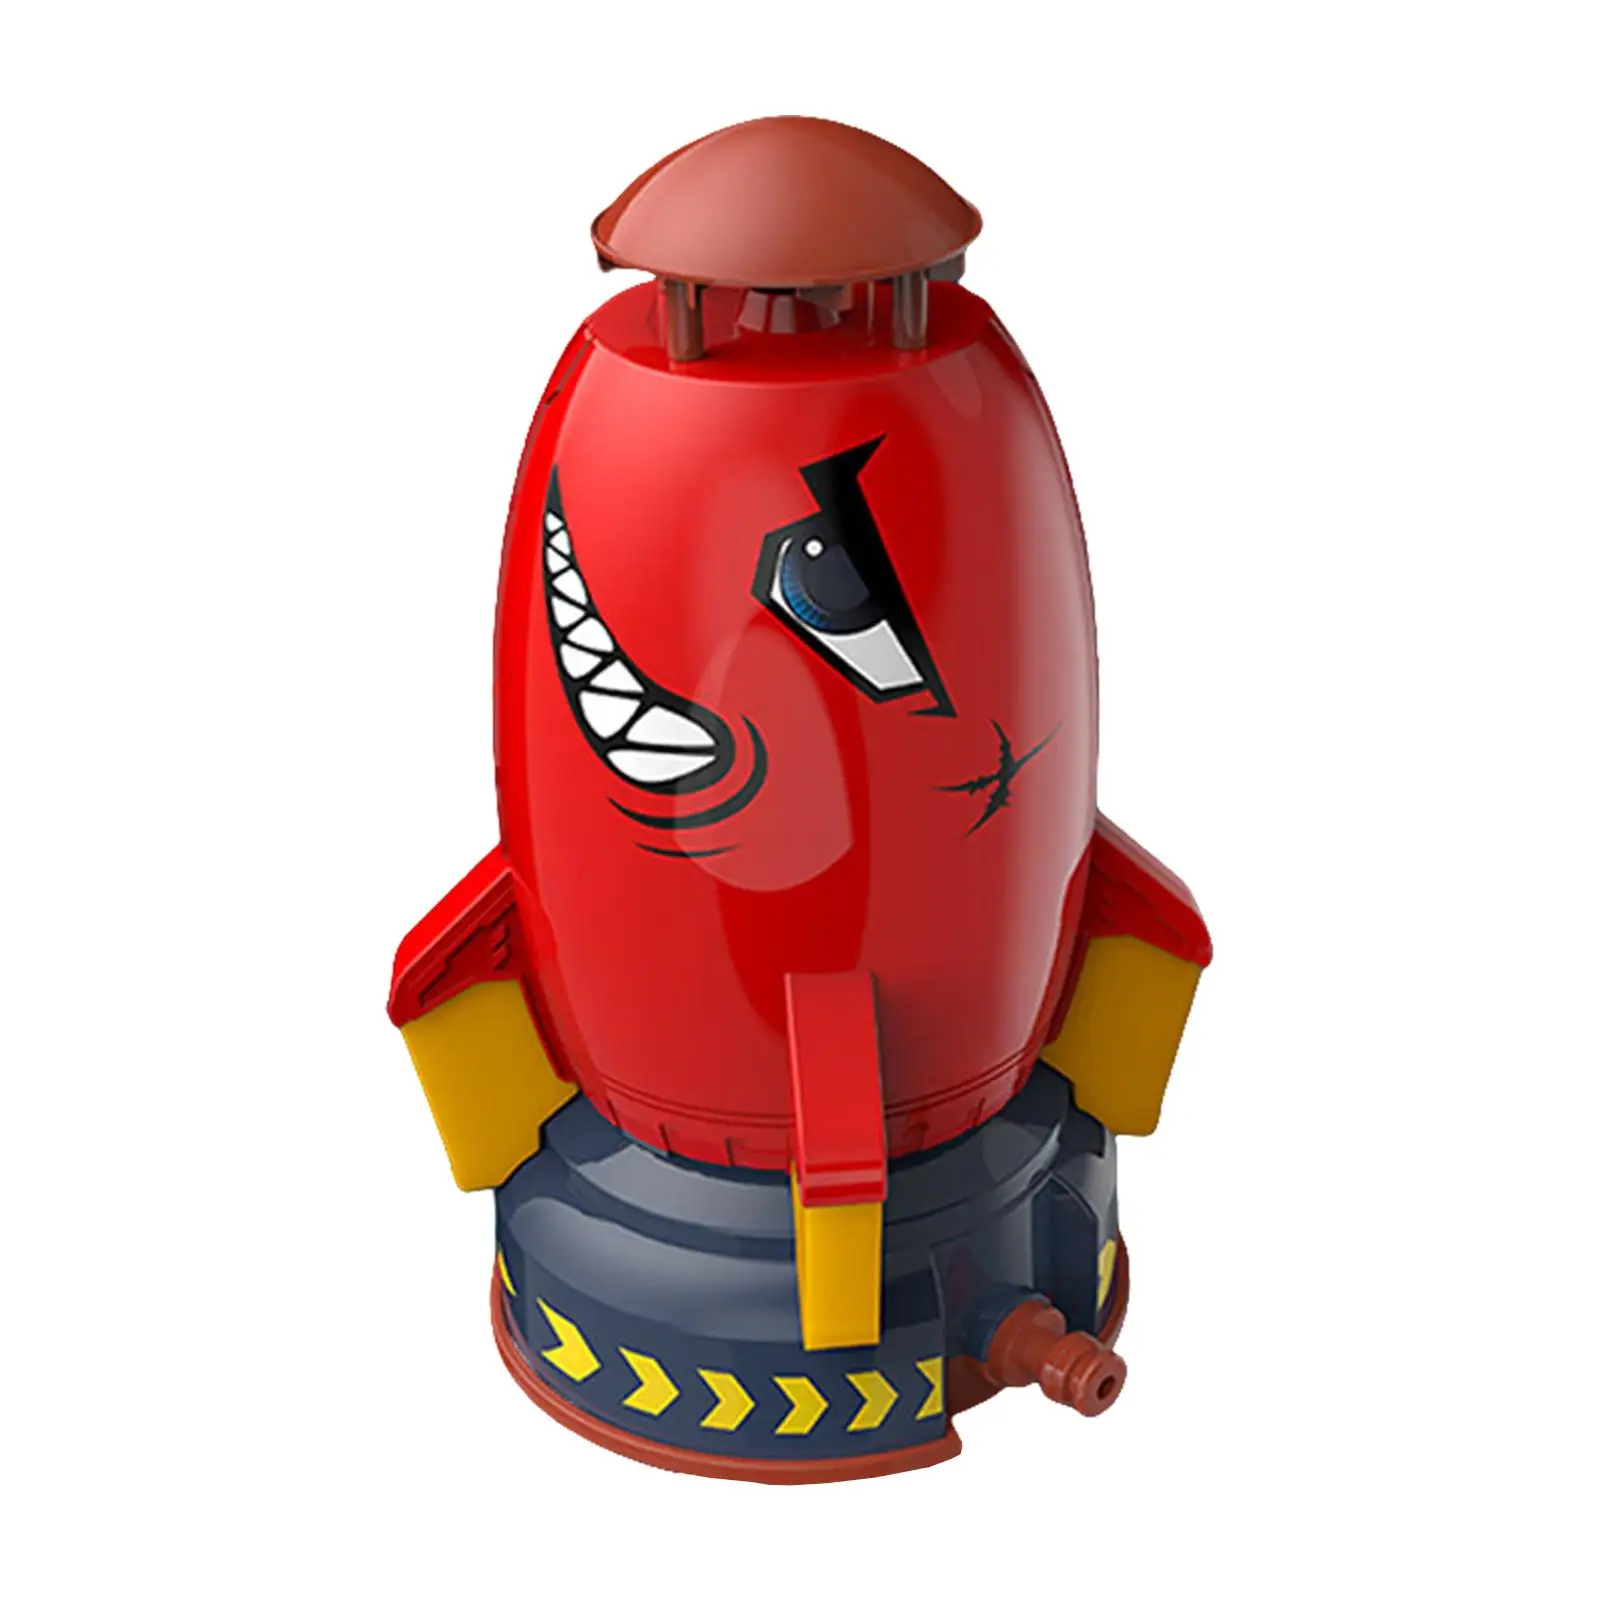 Space Rocket Sprinkler Rocket Shaped Pool Toy Summer Toy for Kids baby gifts